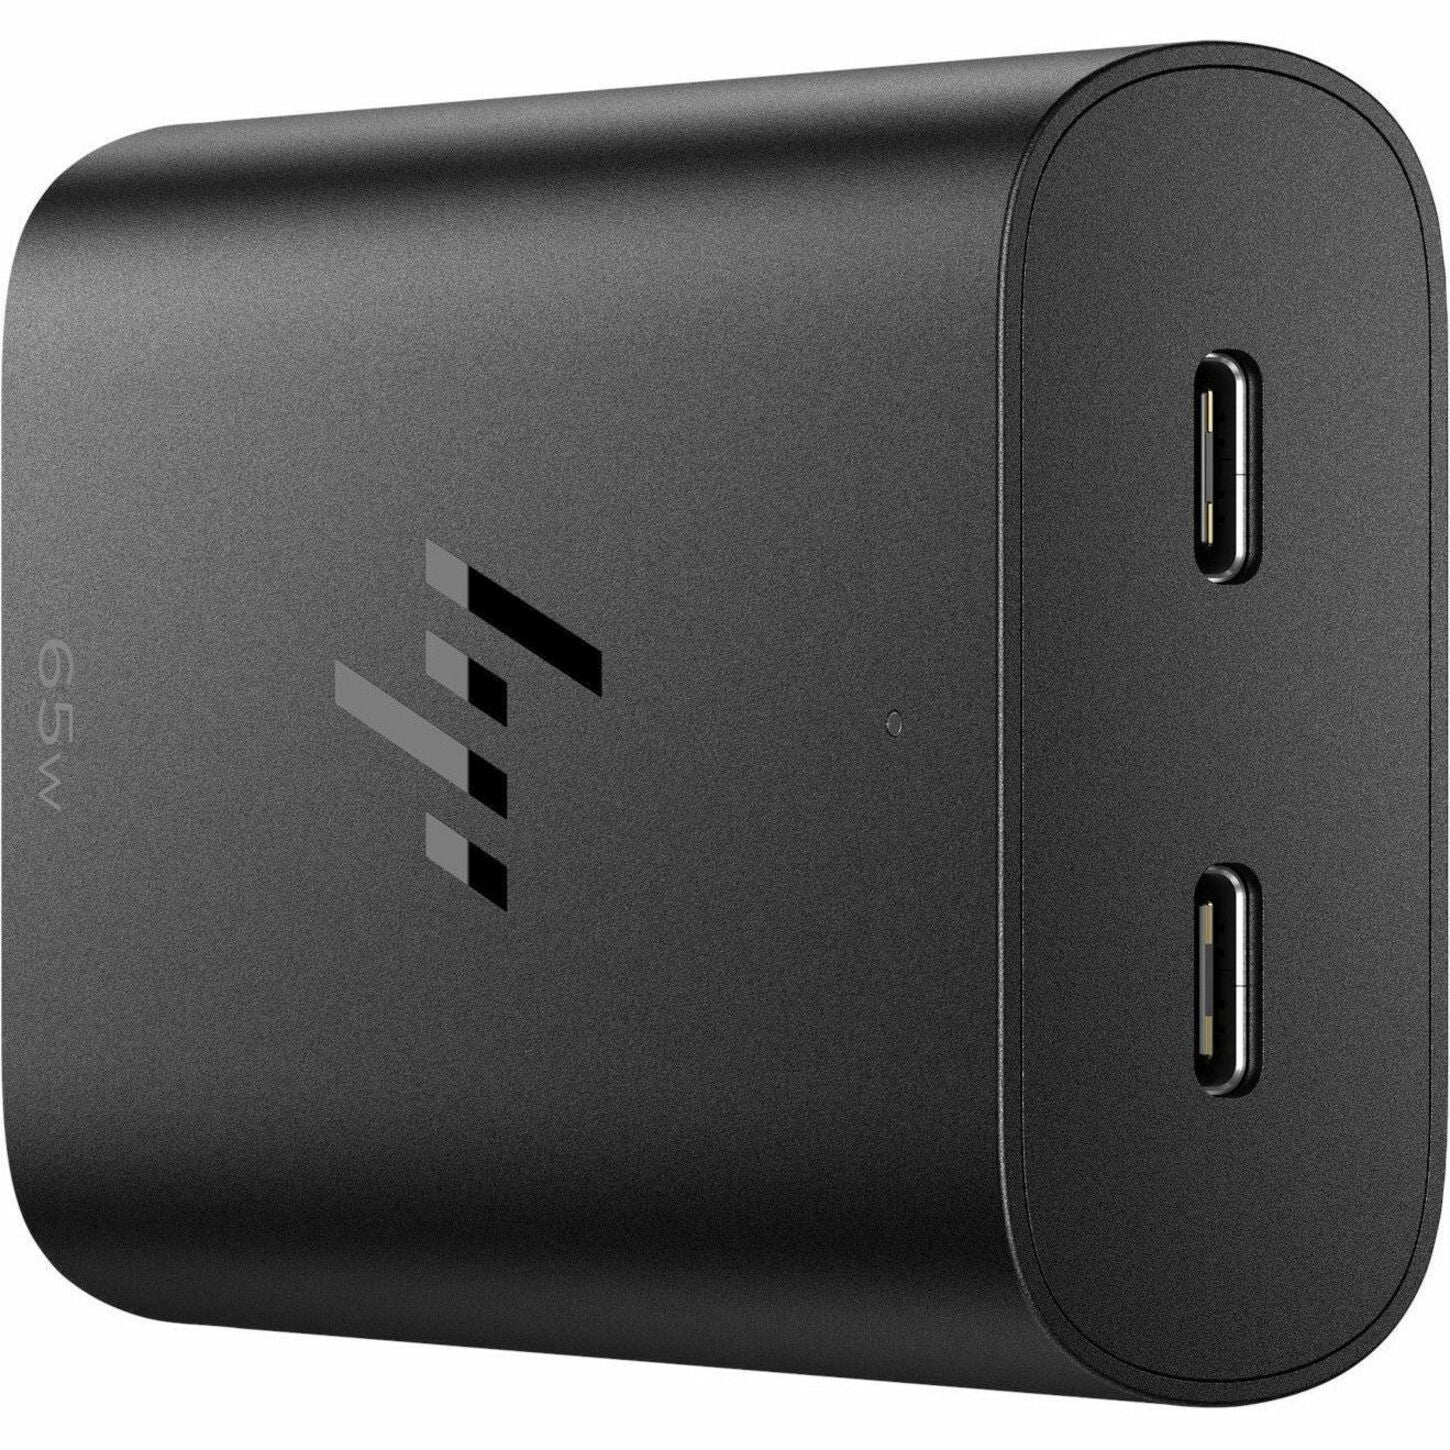 HP 65W GaN USB-C Laptop Charger, Fast Charging for USB Type C Devices